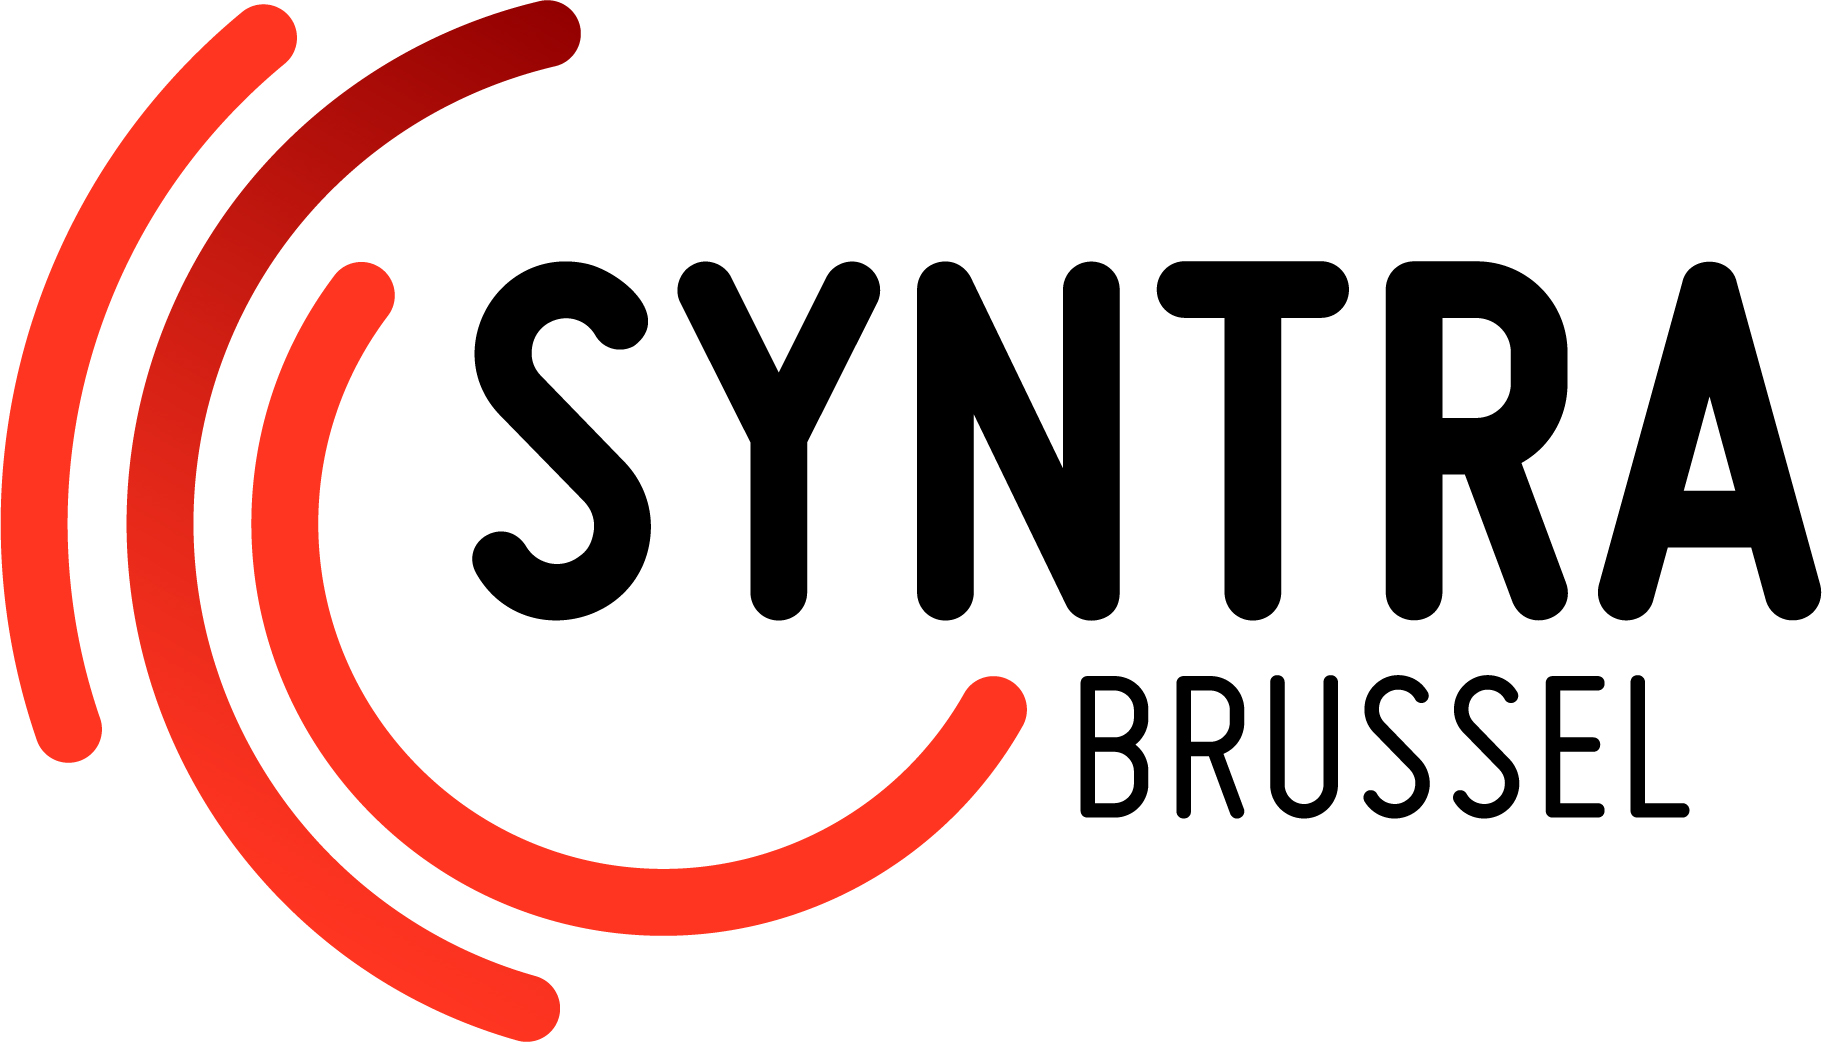 Syntra Brussel